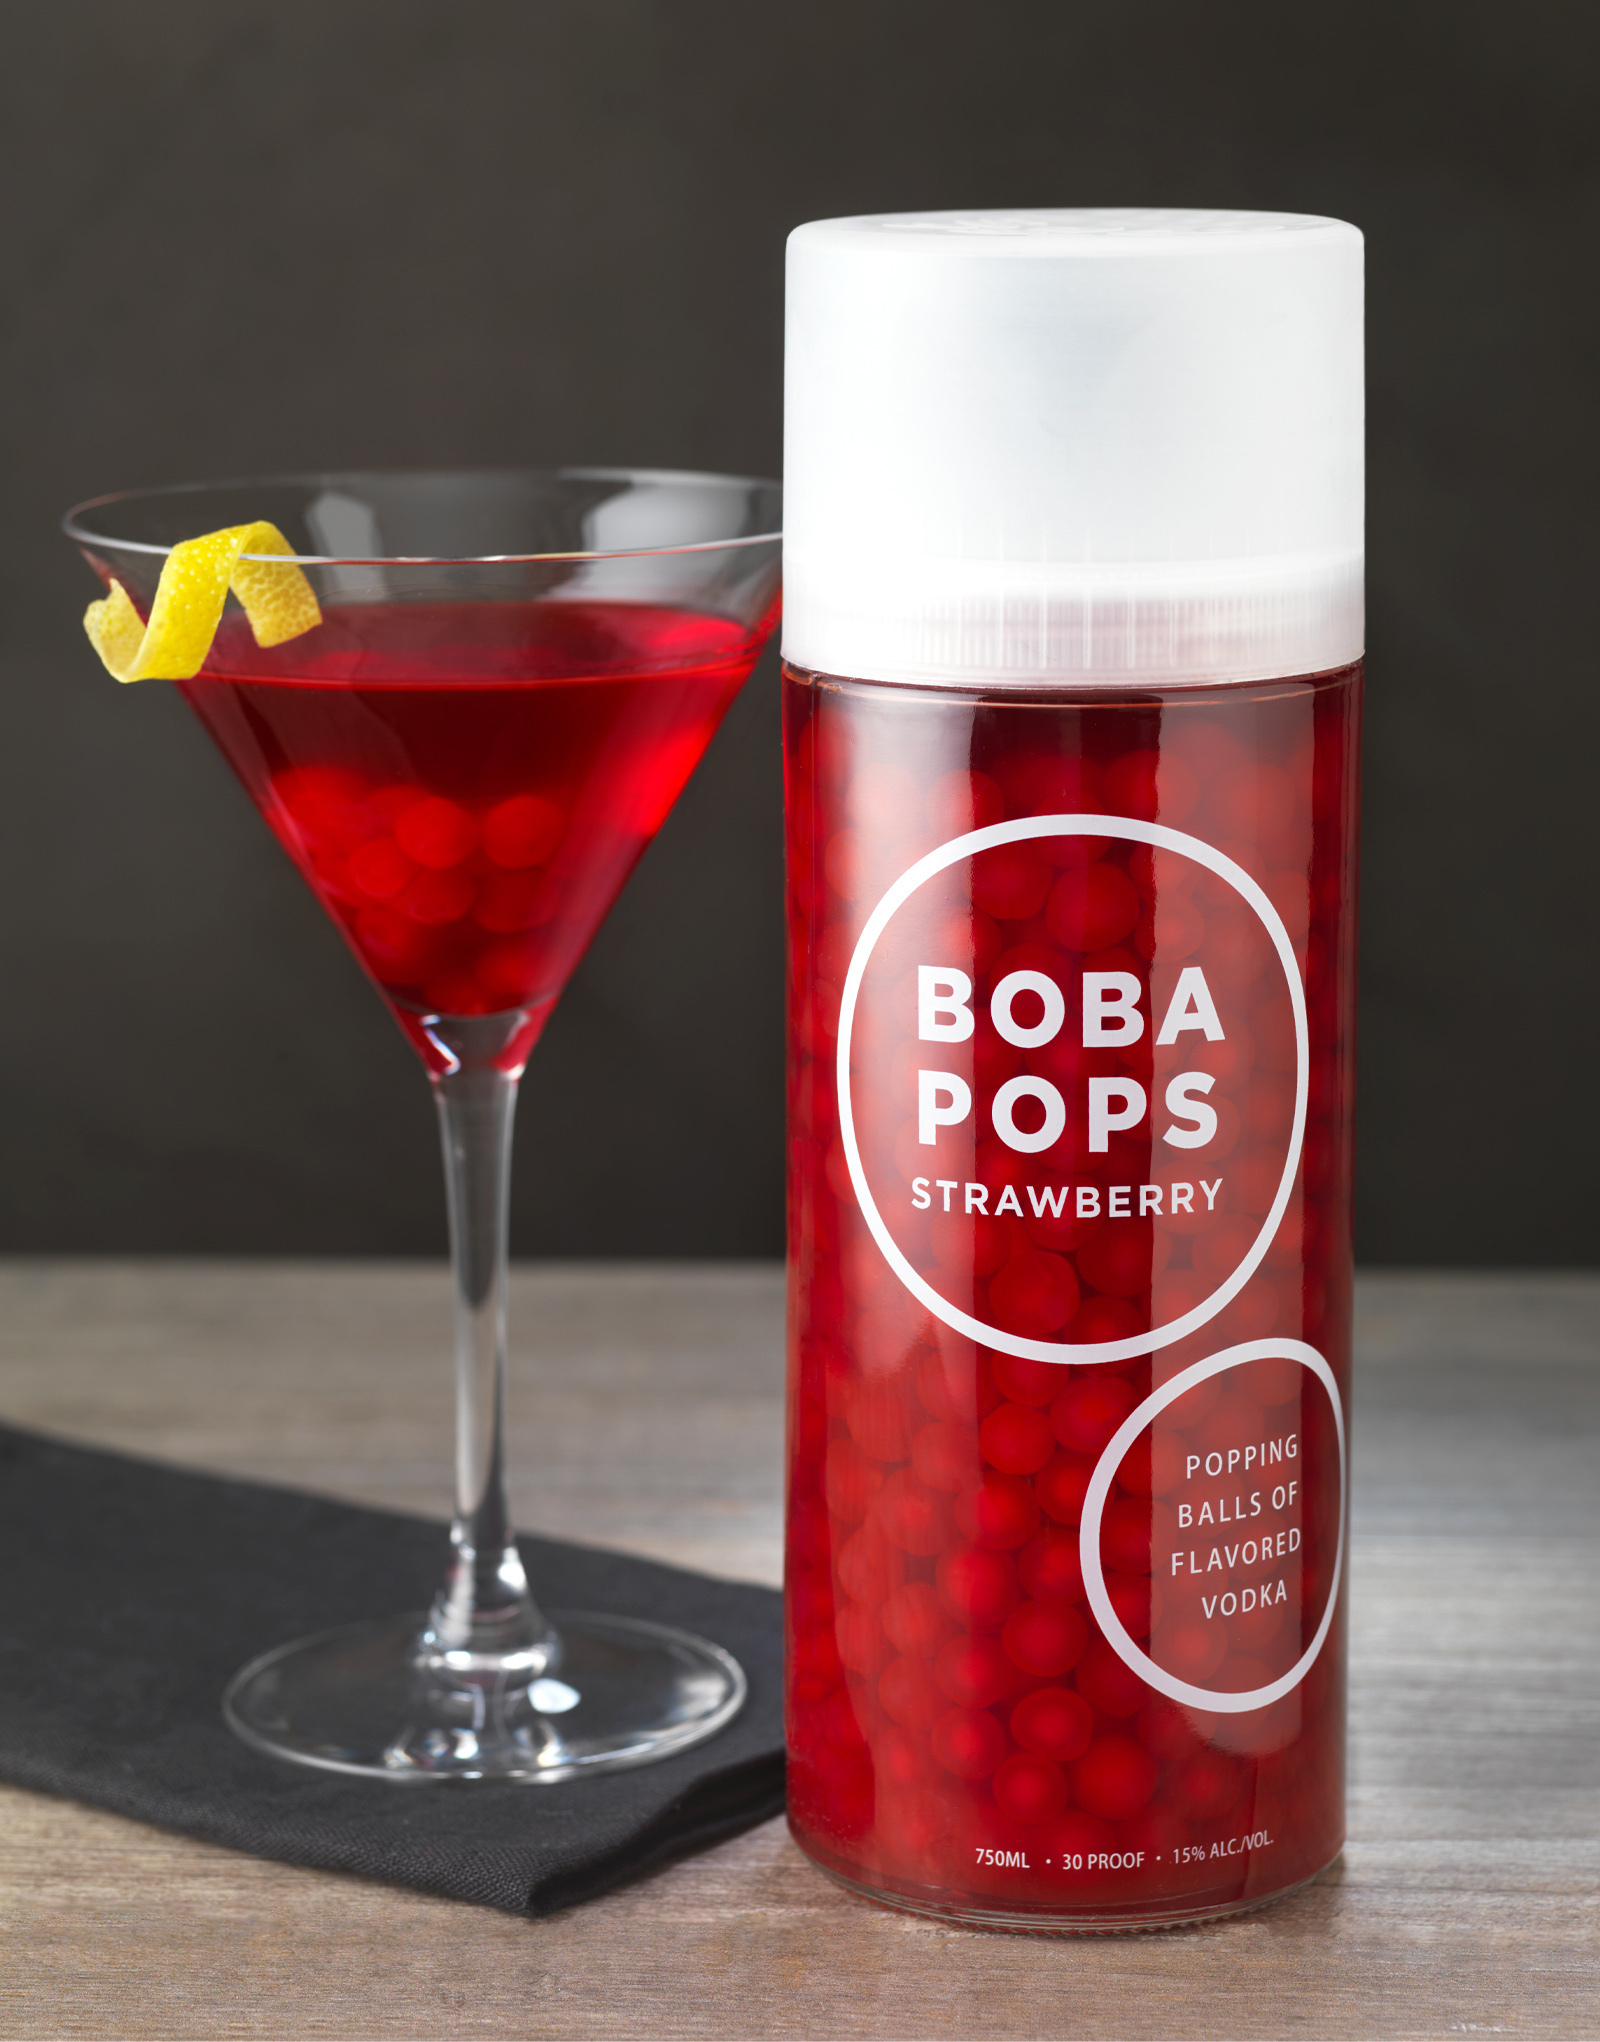 CF Napa Adds More Pop to First Alcohol Boba Brand